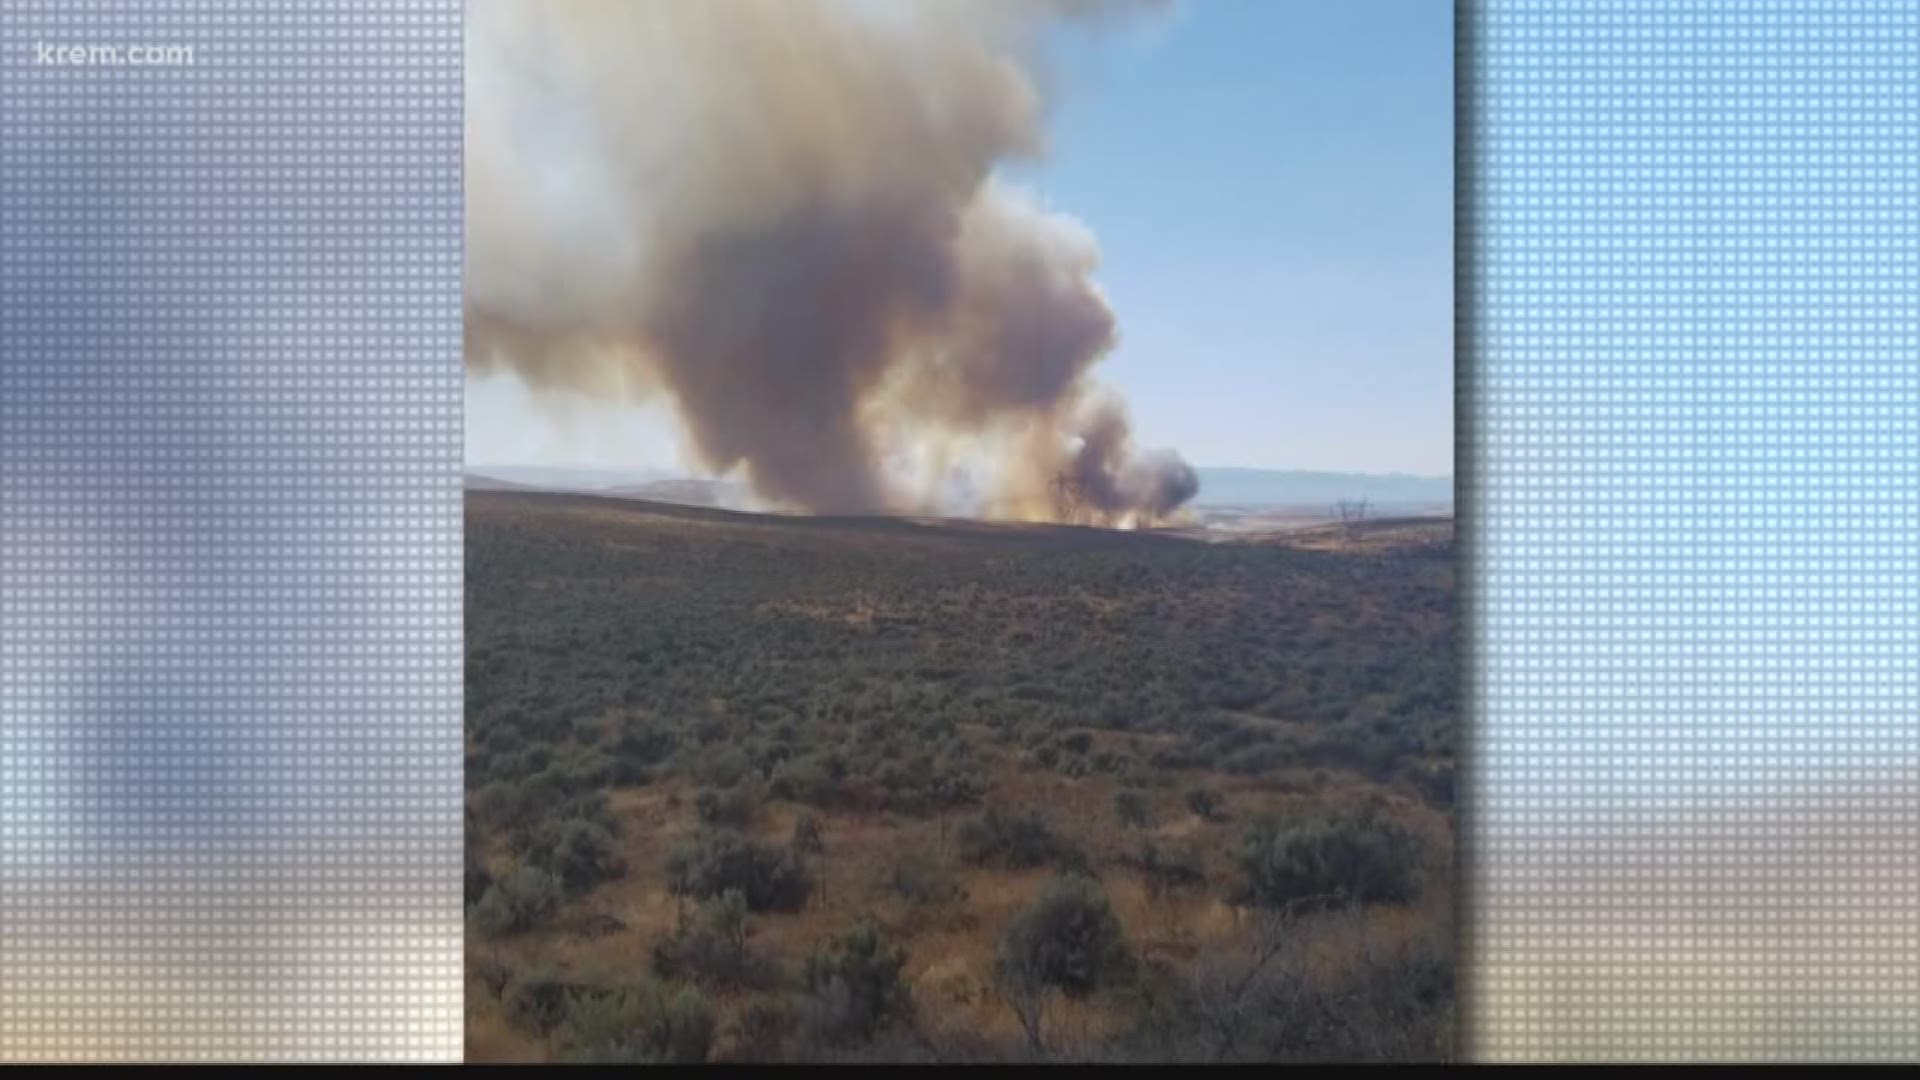 I-90 shut down just east of Kittitas due to 3,000 acre fire